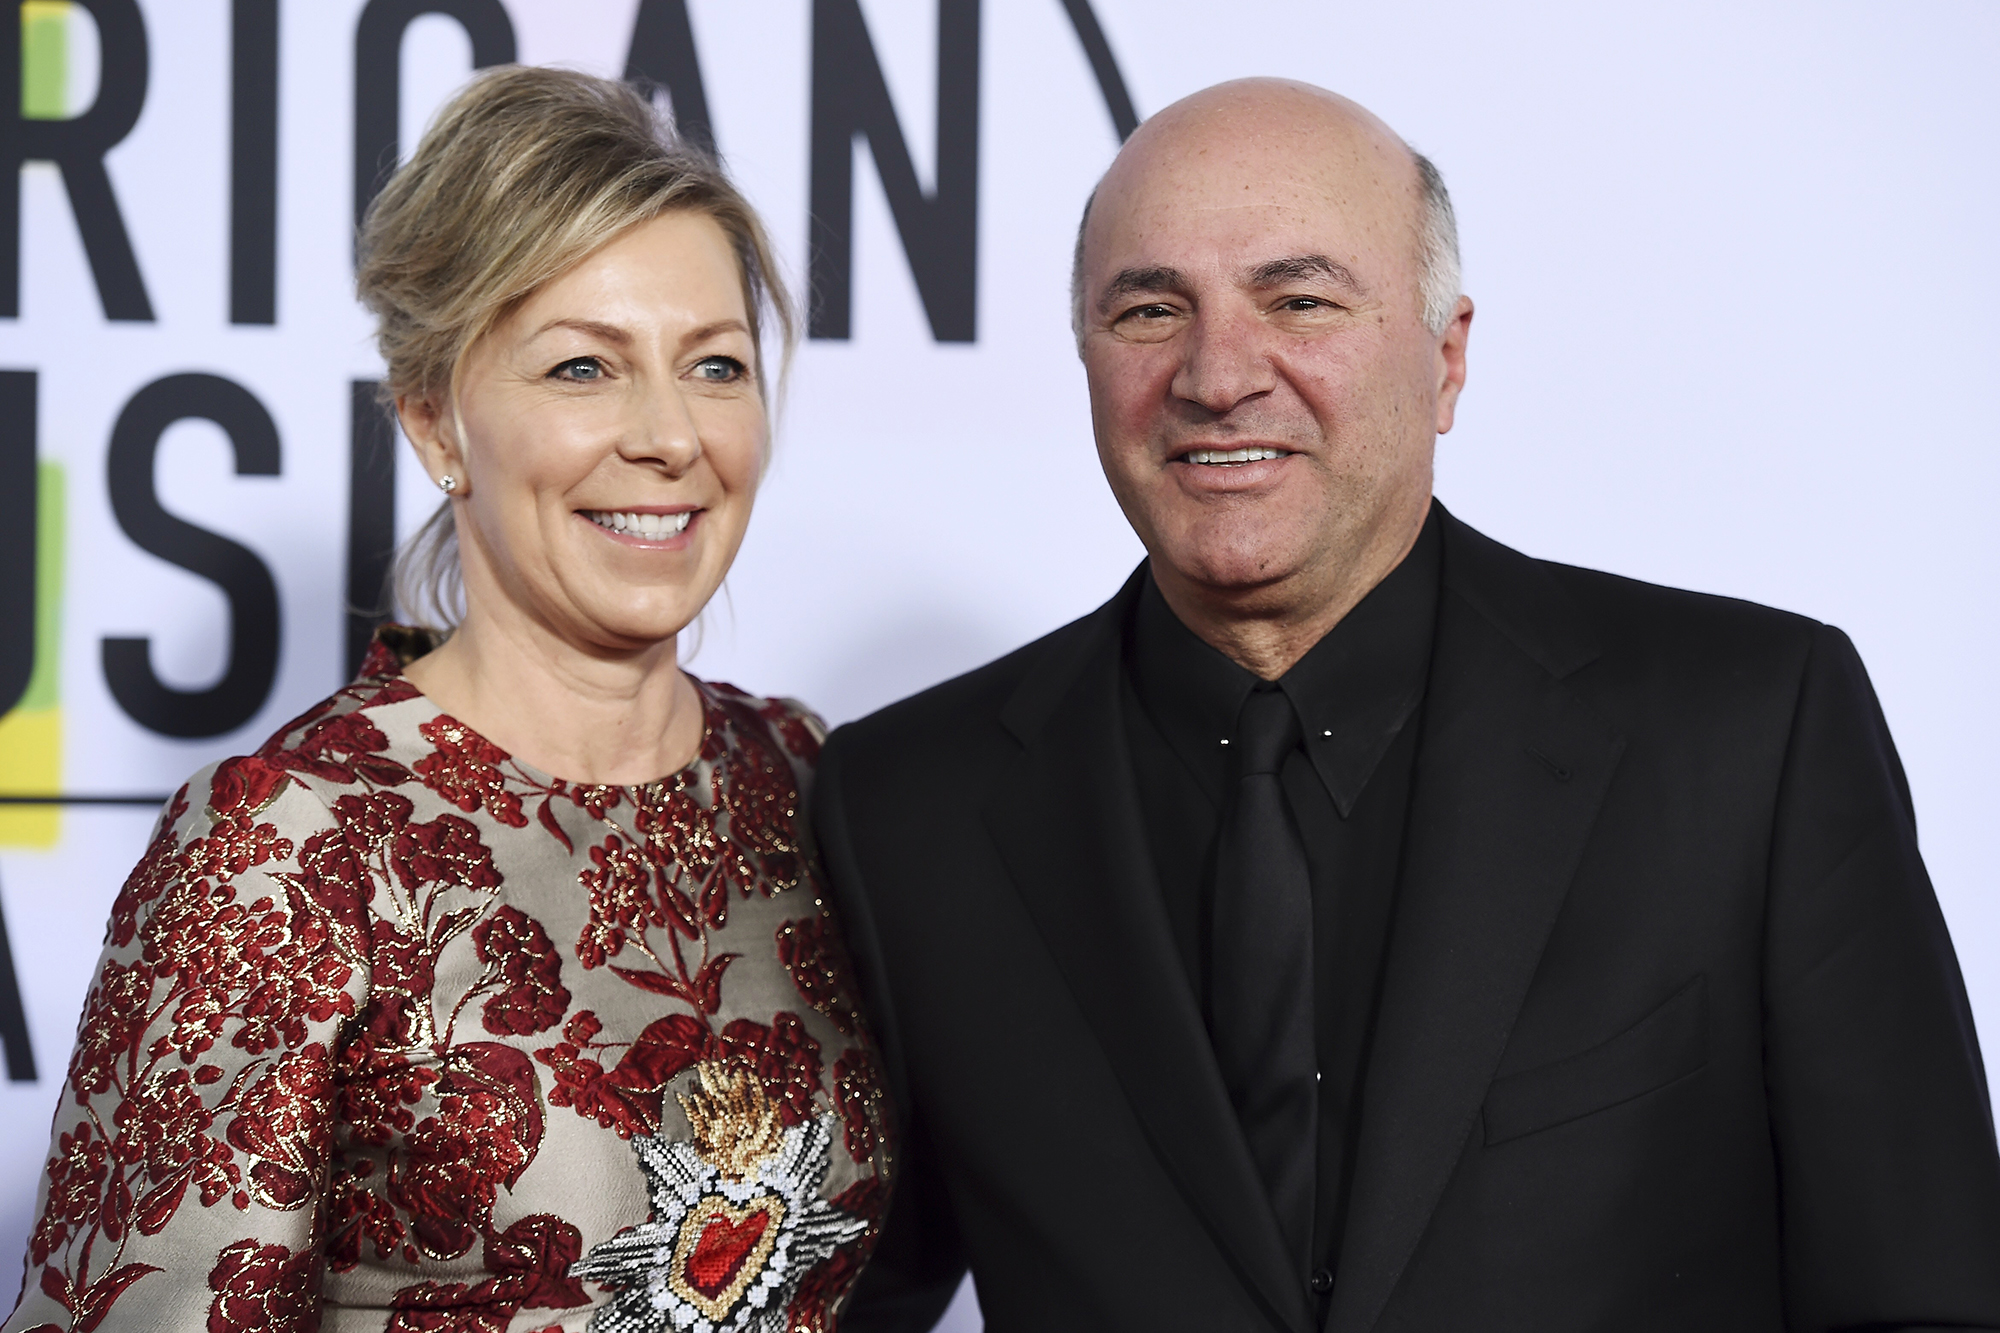 Kevin O'Leary and wife Linda sued for fatal boat crash